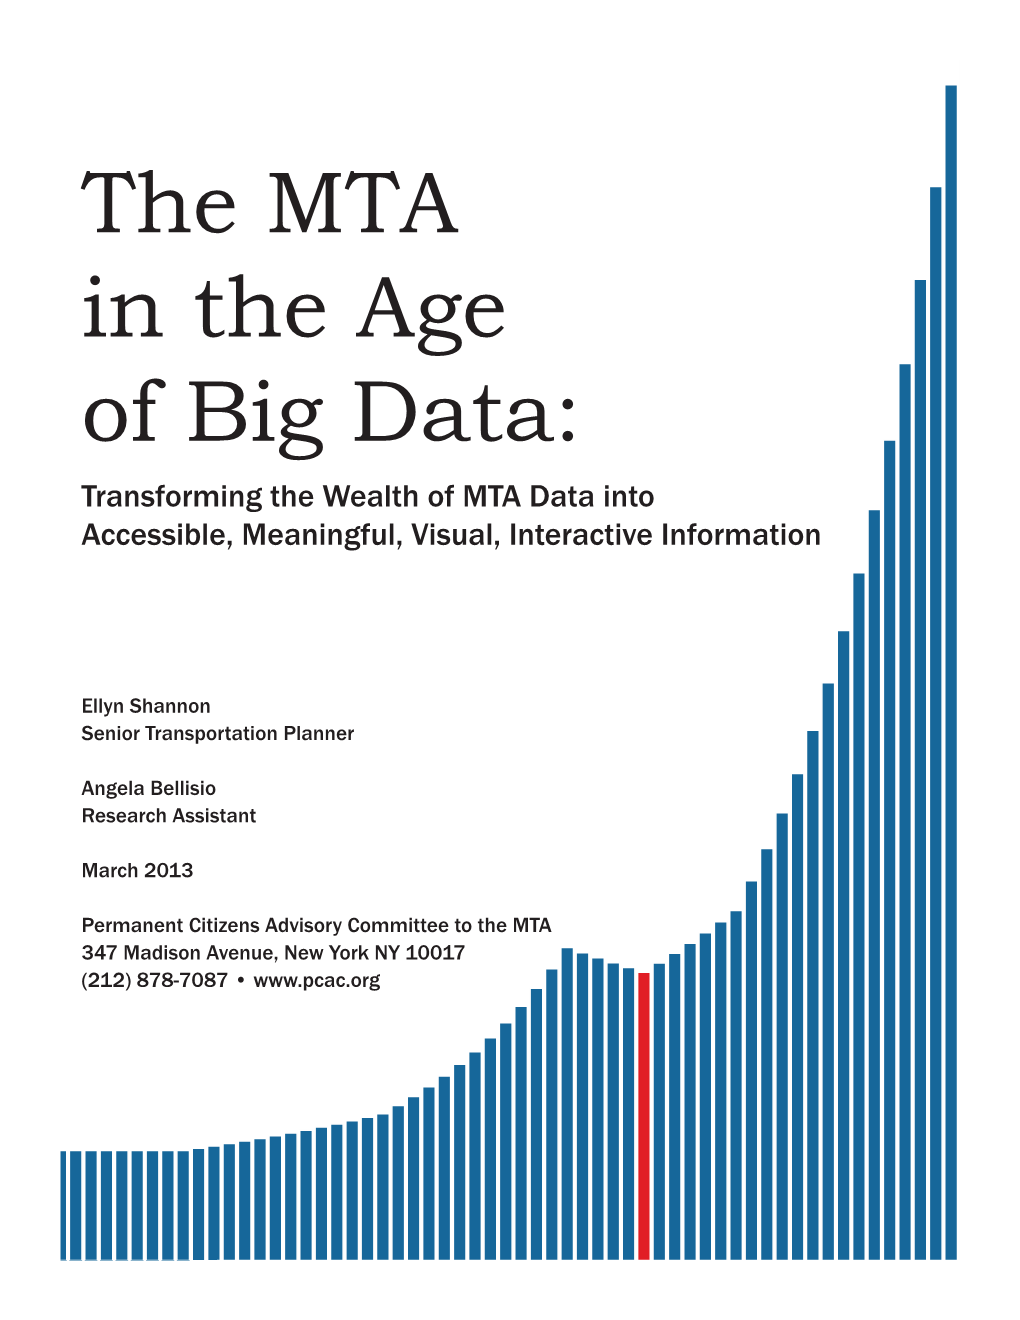 The MTA in the Age of Big Data: Transforming the Wealth of MTA Data Into Accessible, Meaningful, Visual, Interactive Information